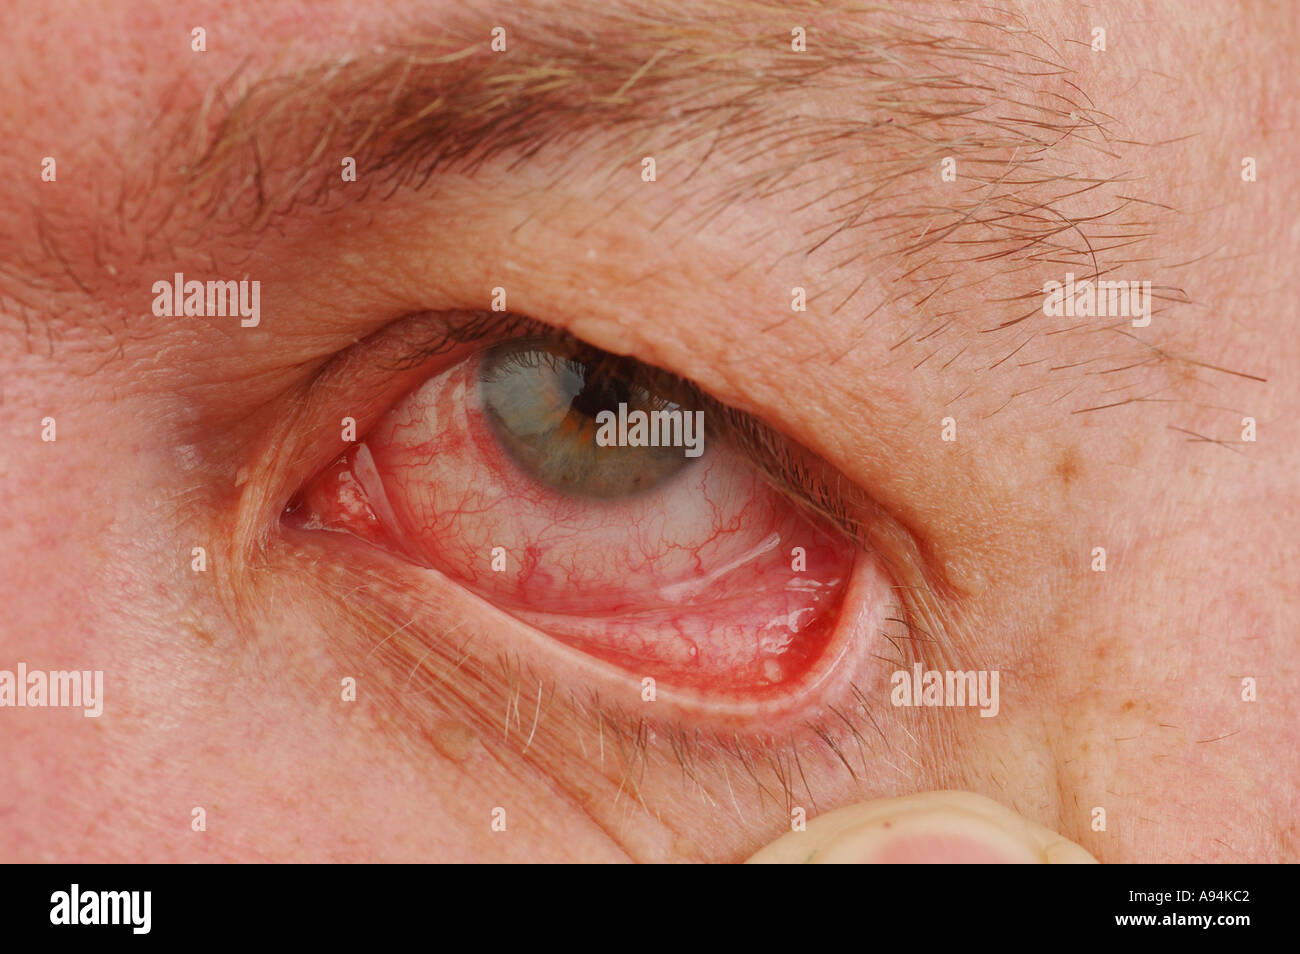 My bloodshot eyes after leaving contact lenses in for to long dsca 3273 Stock Photo